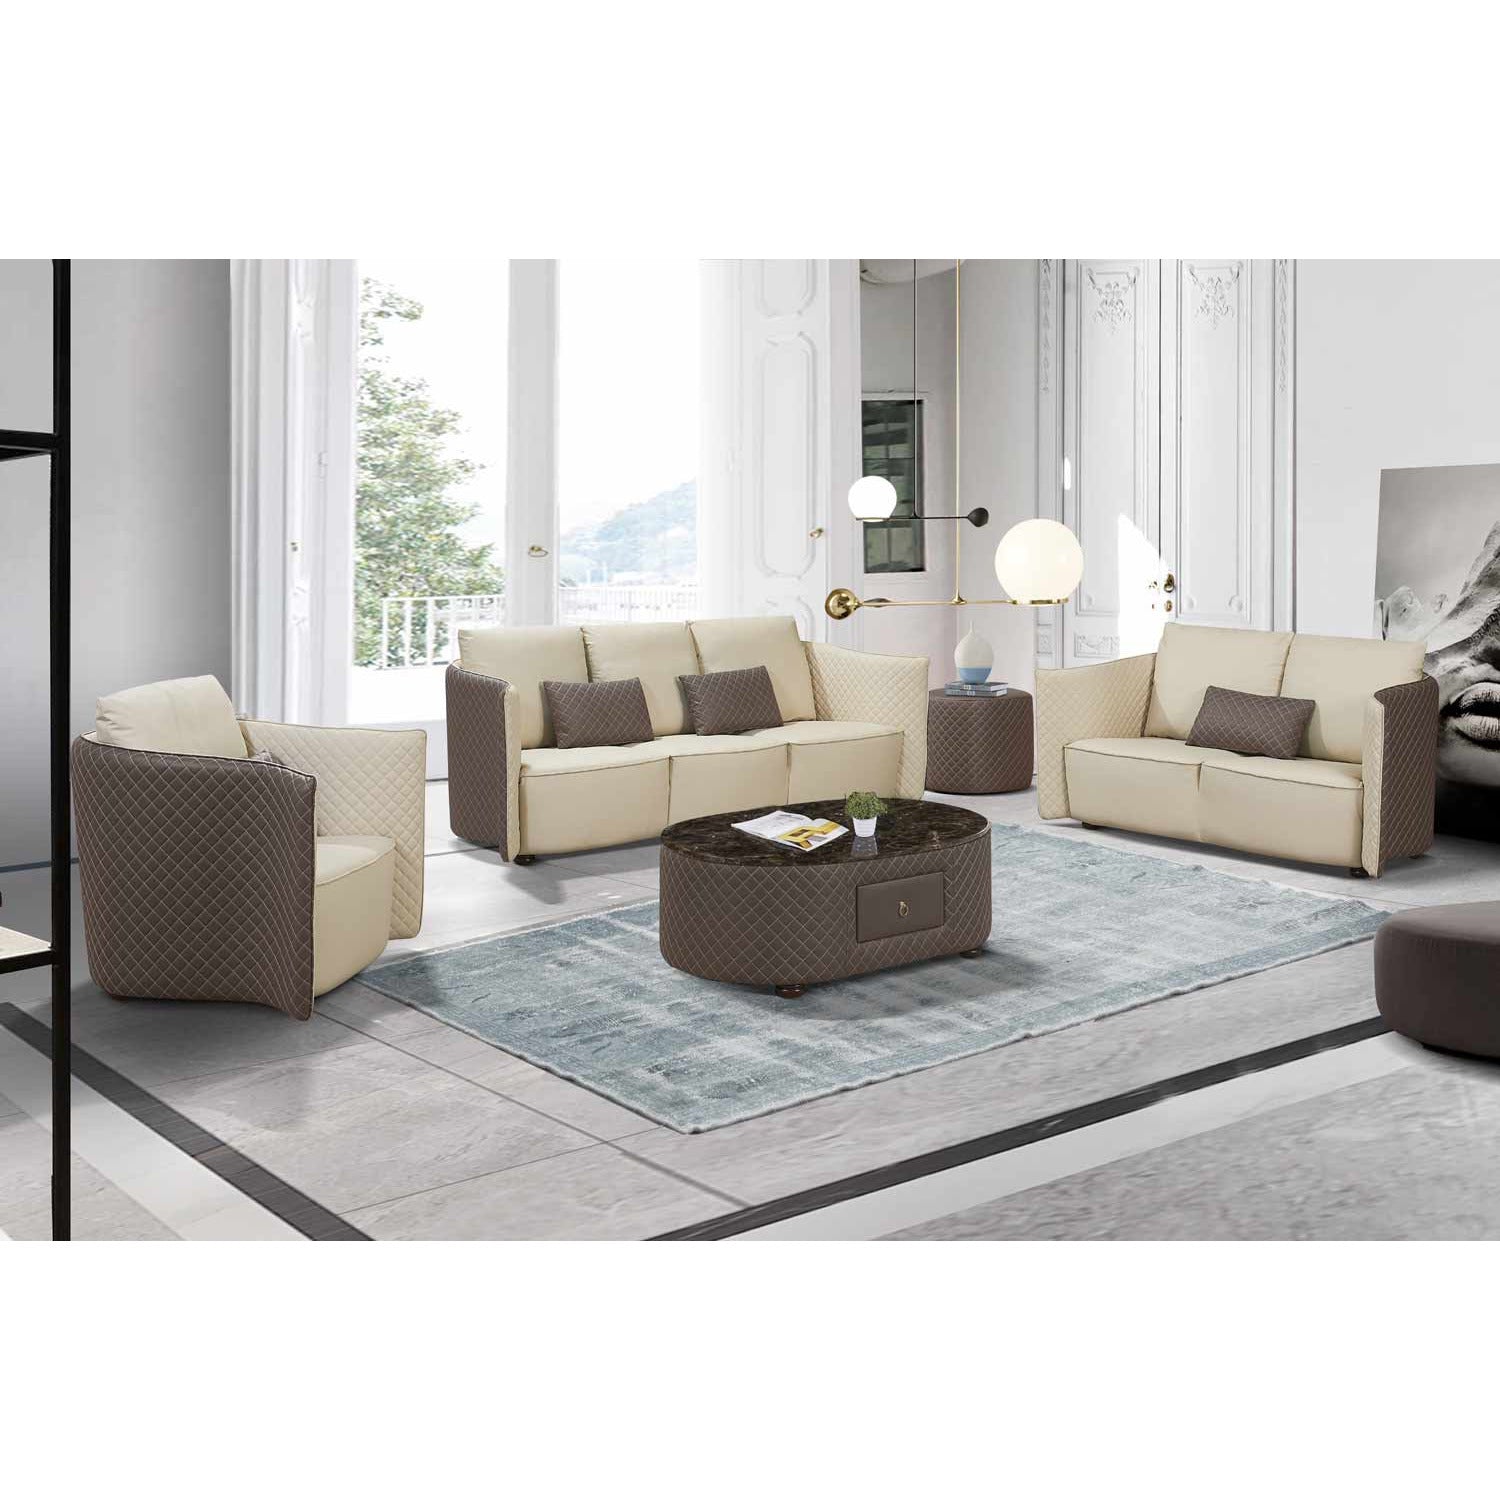 European Furniture - Makassar Coffee Table in Grey & Taupe - 52550-CT - New Star Living